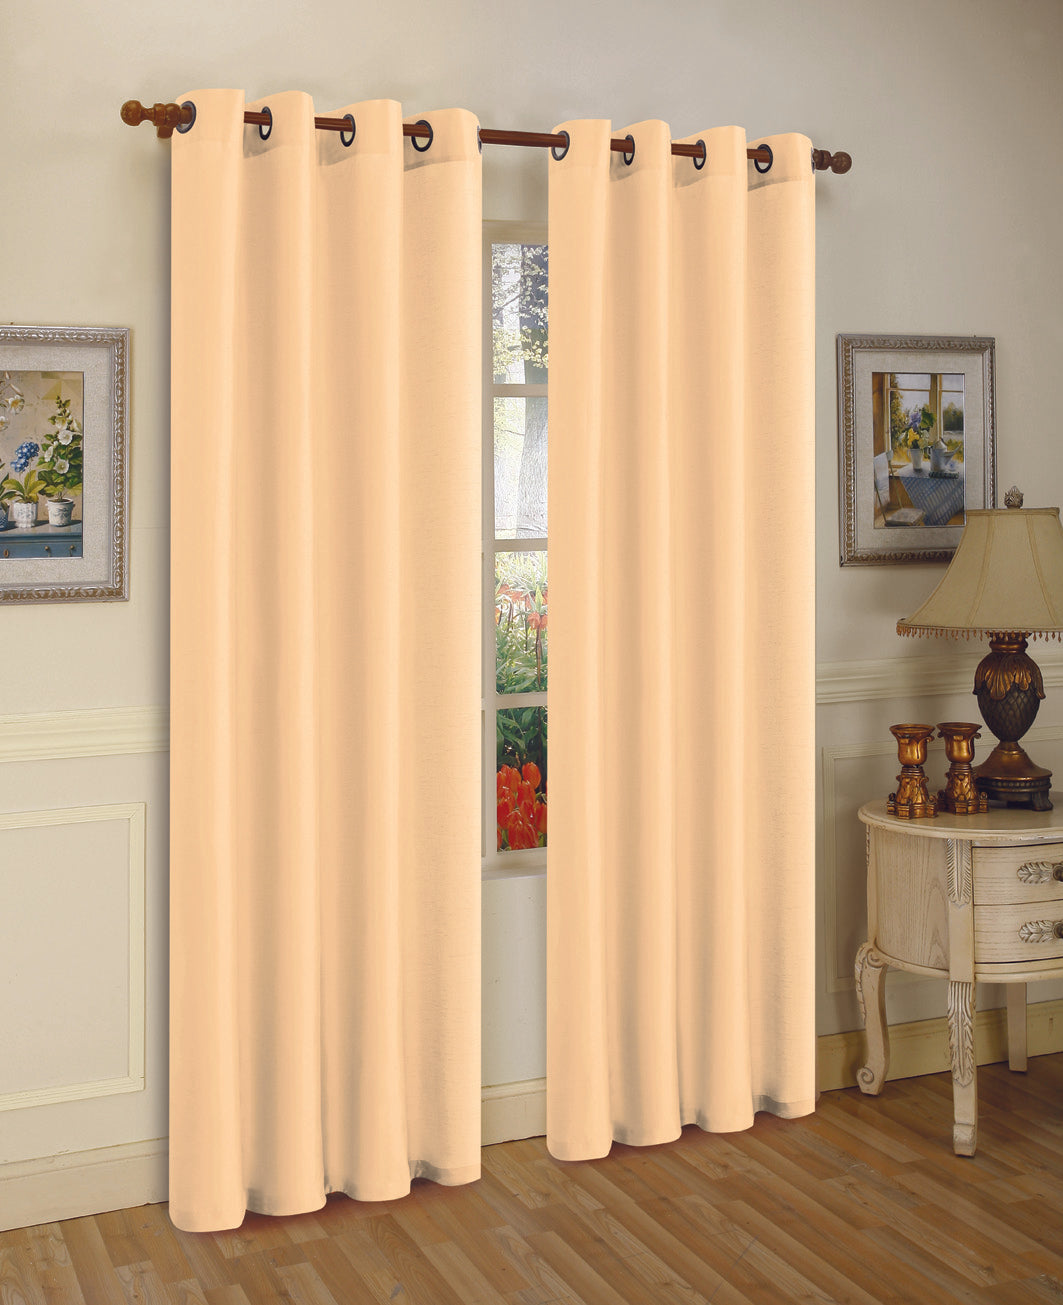 J&V TEXTILES 2 Panels Solid Grommet Faux Silk Window Curtain Drapes Treatment in 84" Length